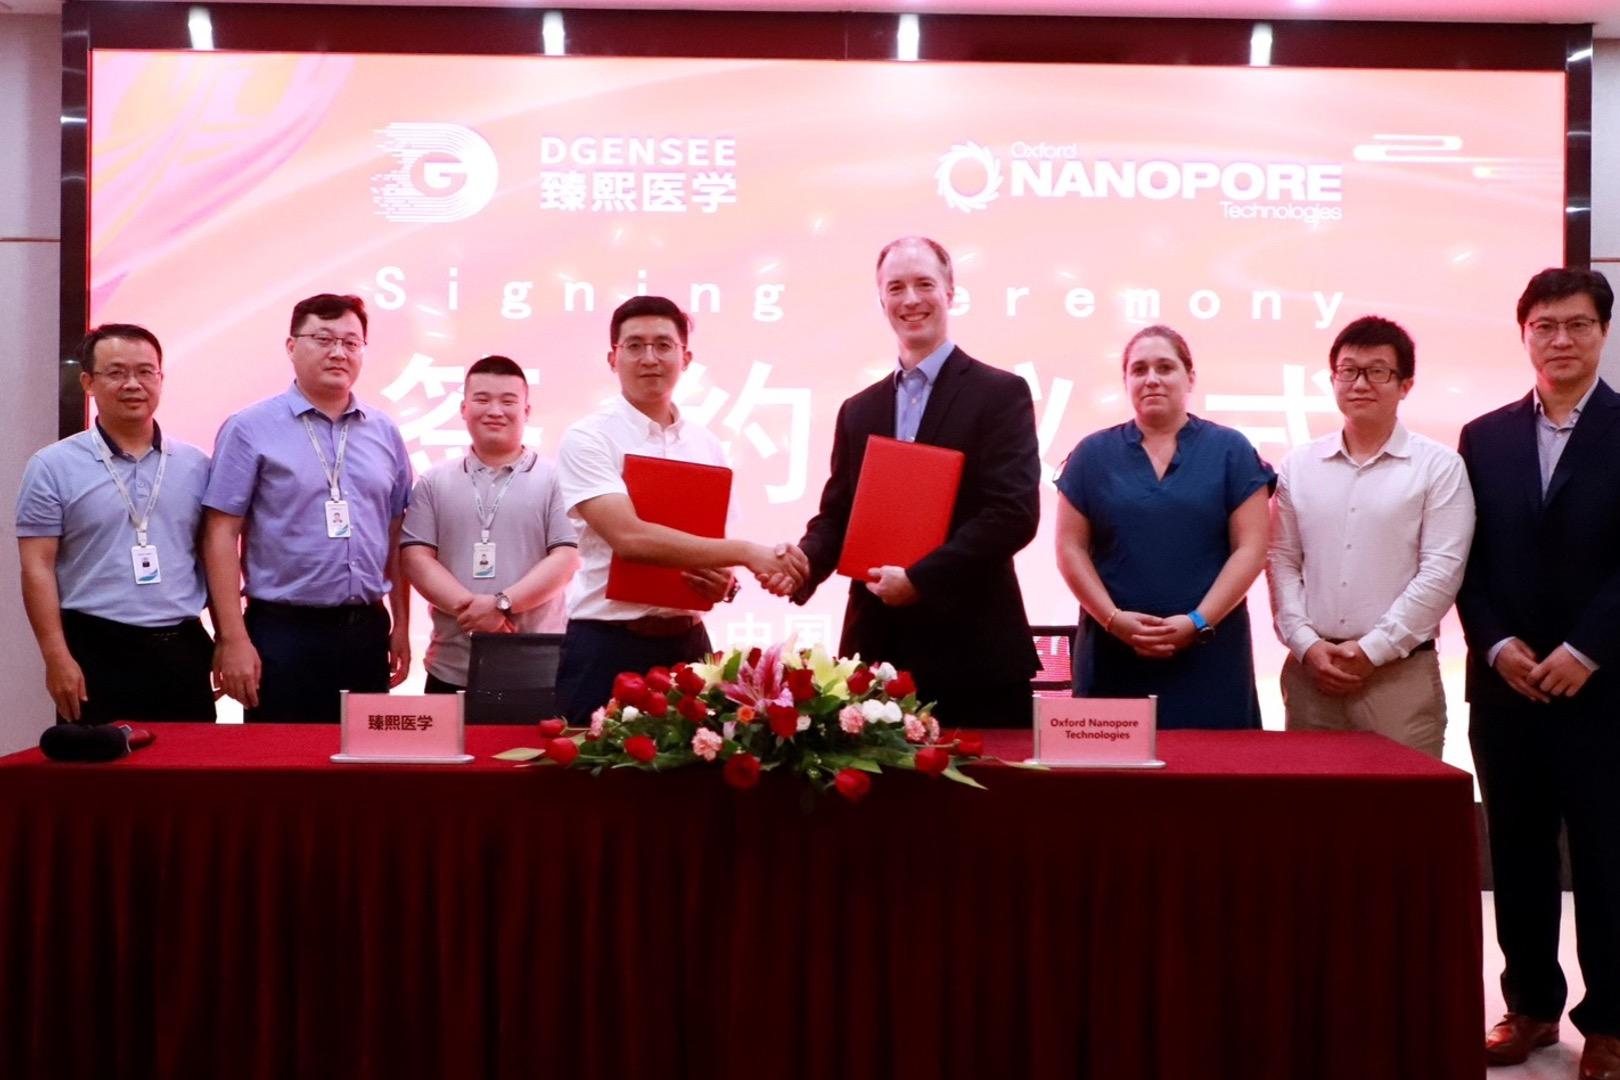 Oxford Nanopore Technologies and leading China-based diagnostic companies collaborate to bring nanopore sequencing-based in-vitro diagnostic tests to China